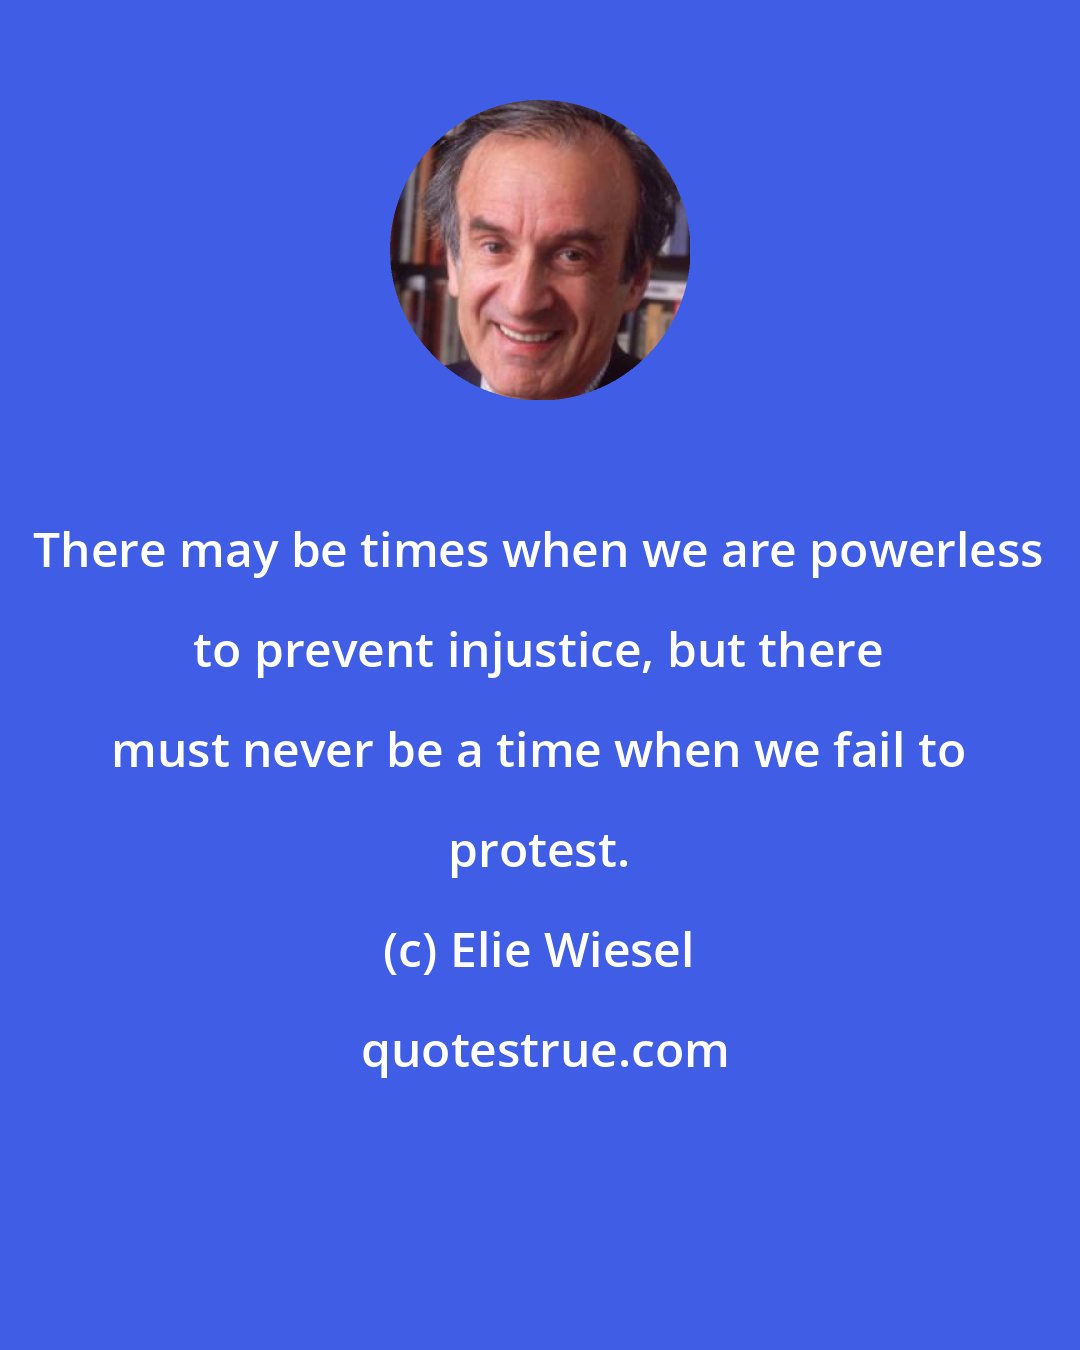 Elie Wiesel: There may be times when we are powerless to prevent injustice, but there must never be a time when we fail to protest.